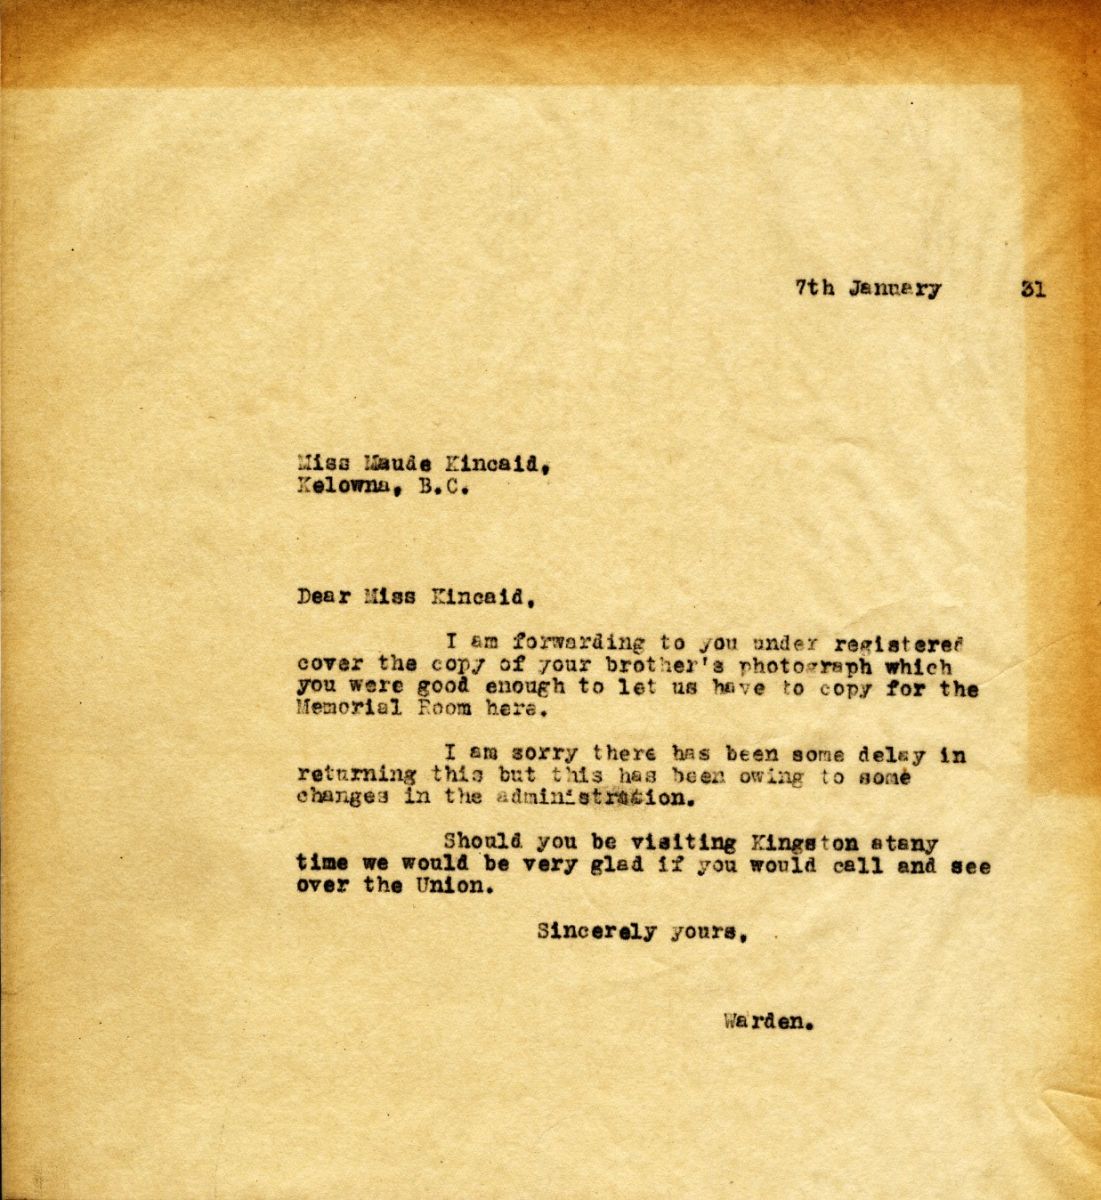 Letter from the Warden to Miss Maude Kincaid, 7th January 1931